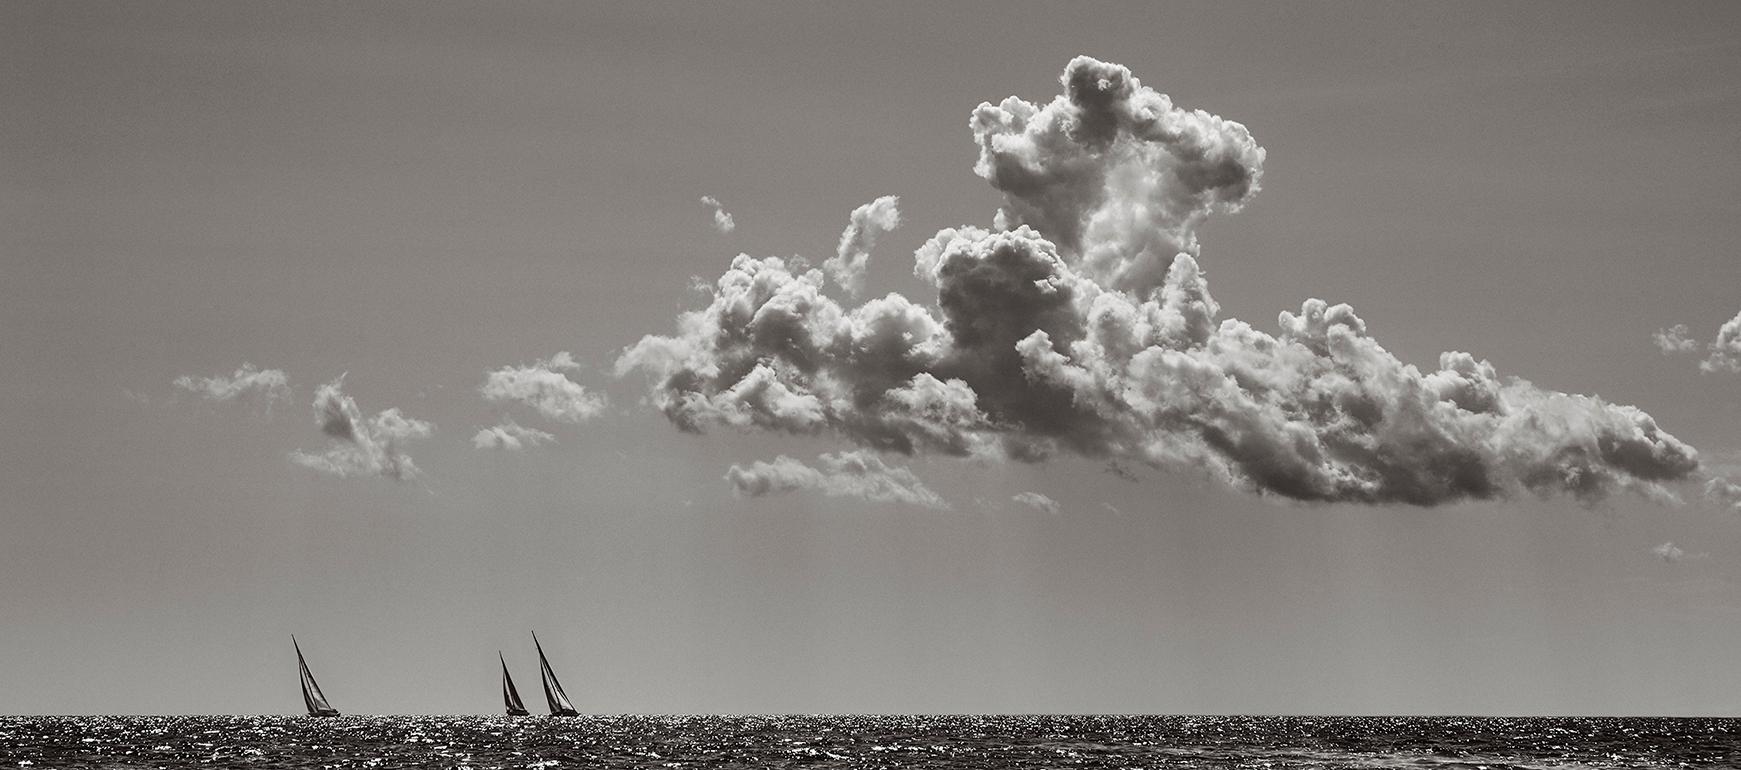 Drew Doggett Portrait Photograph - Iconic Racing Yachts in an Abstract Composition on the Still Seas